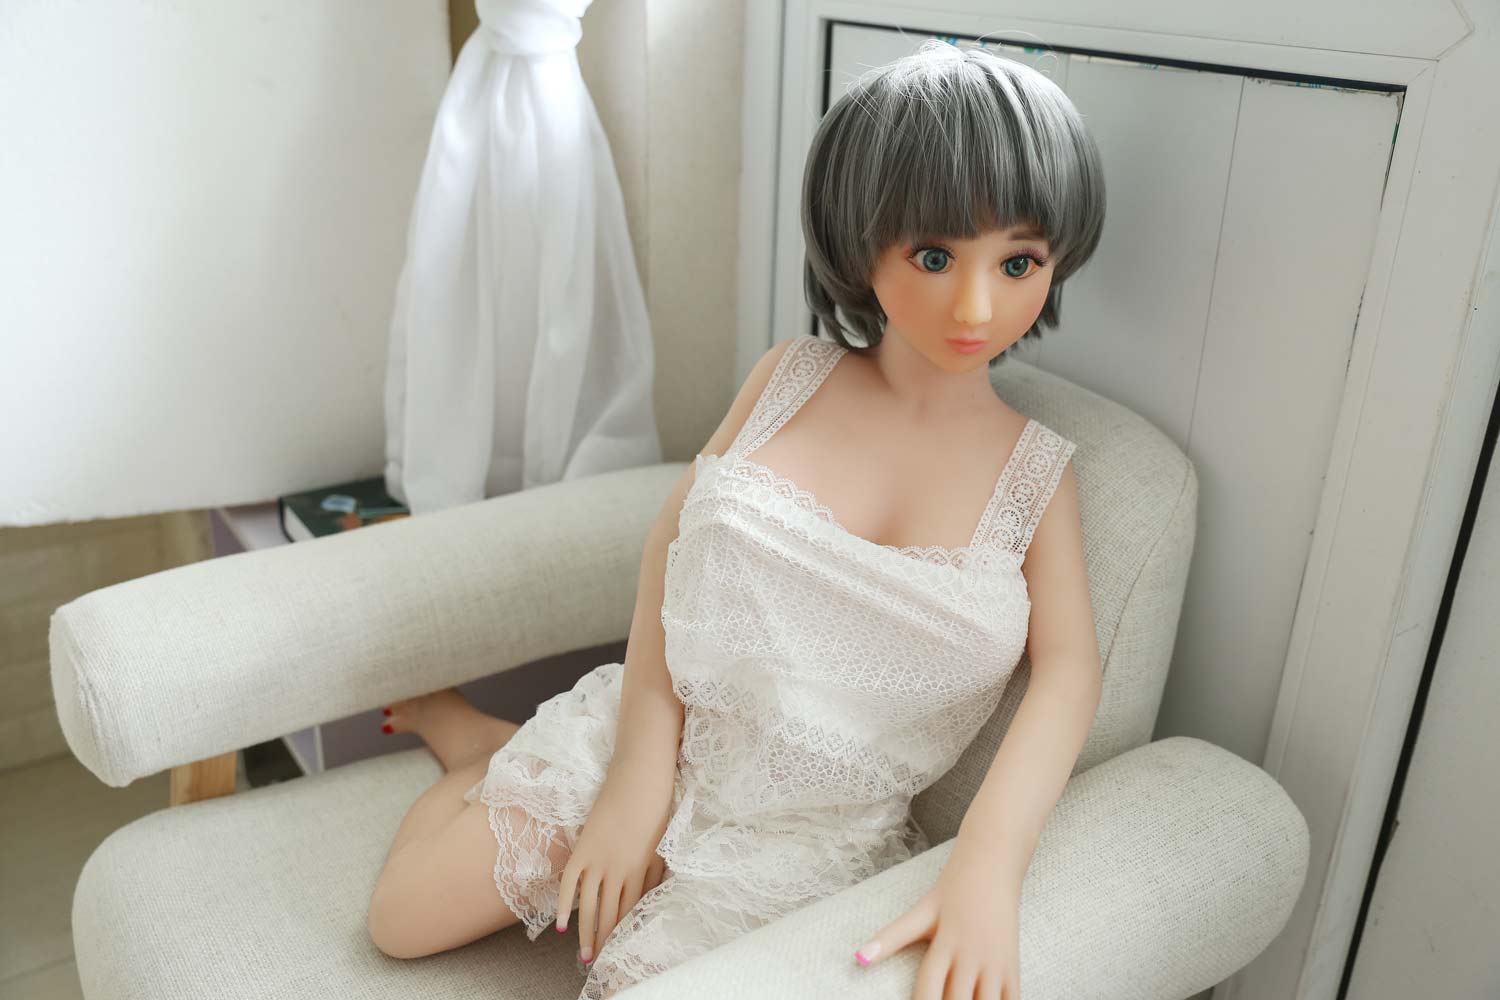 Mini sex doll with hands on the armrest of the sofa